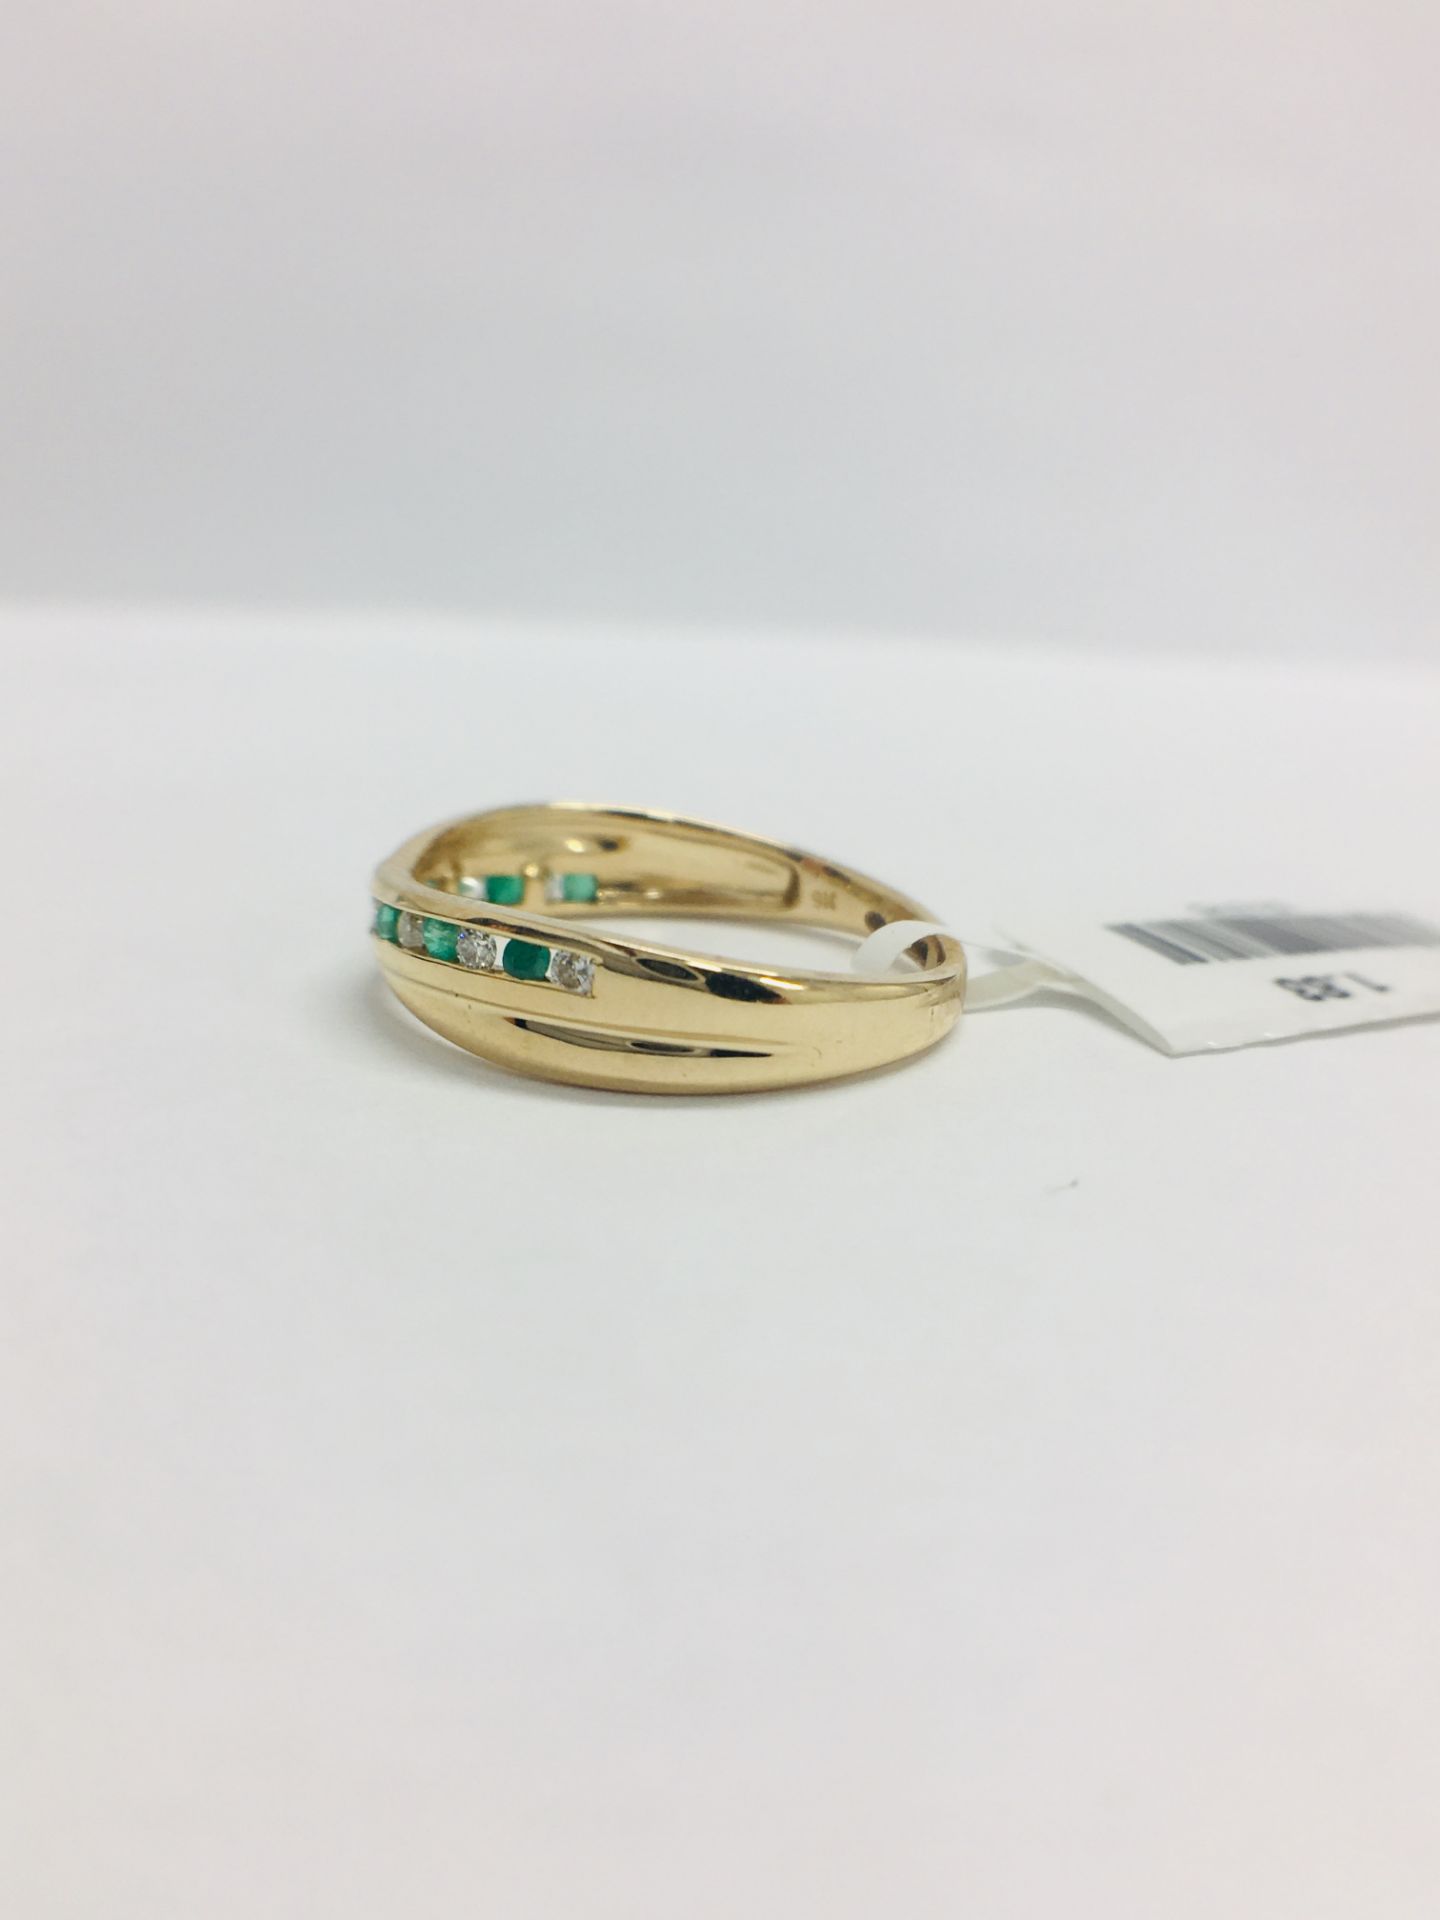 9ct Yellow Gold Emerald Diamond Crossover Band Ring - Image 4 of 11